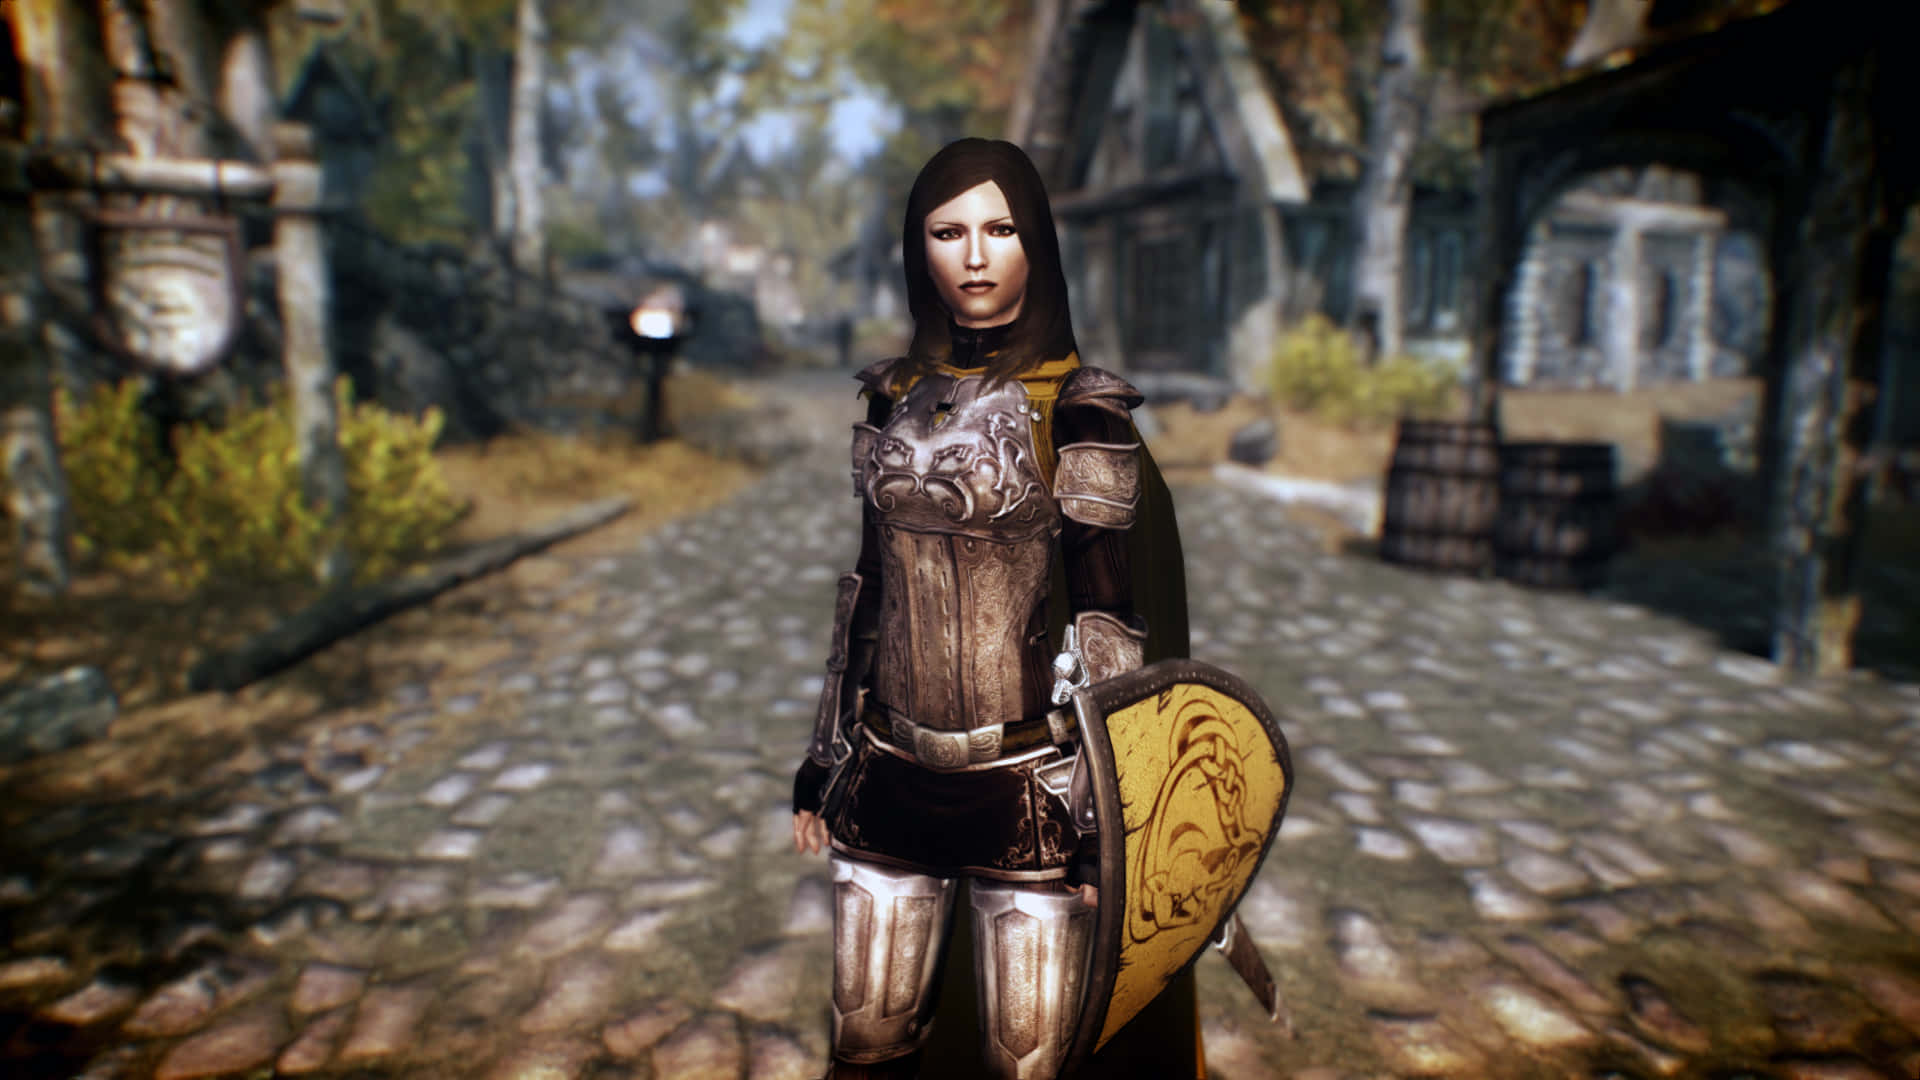 The loyal and fearless Lydia, housecarl of the Dragonborn, in the enthralling world of Skyrim. Wallpaper